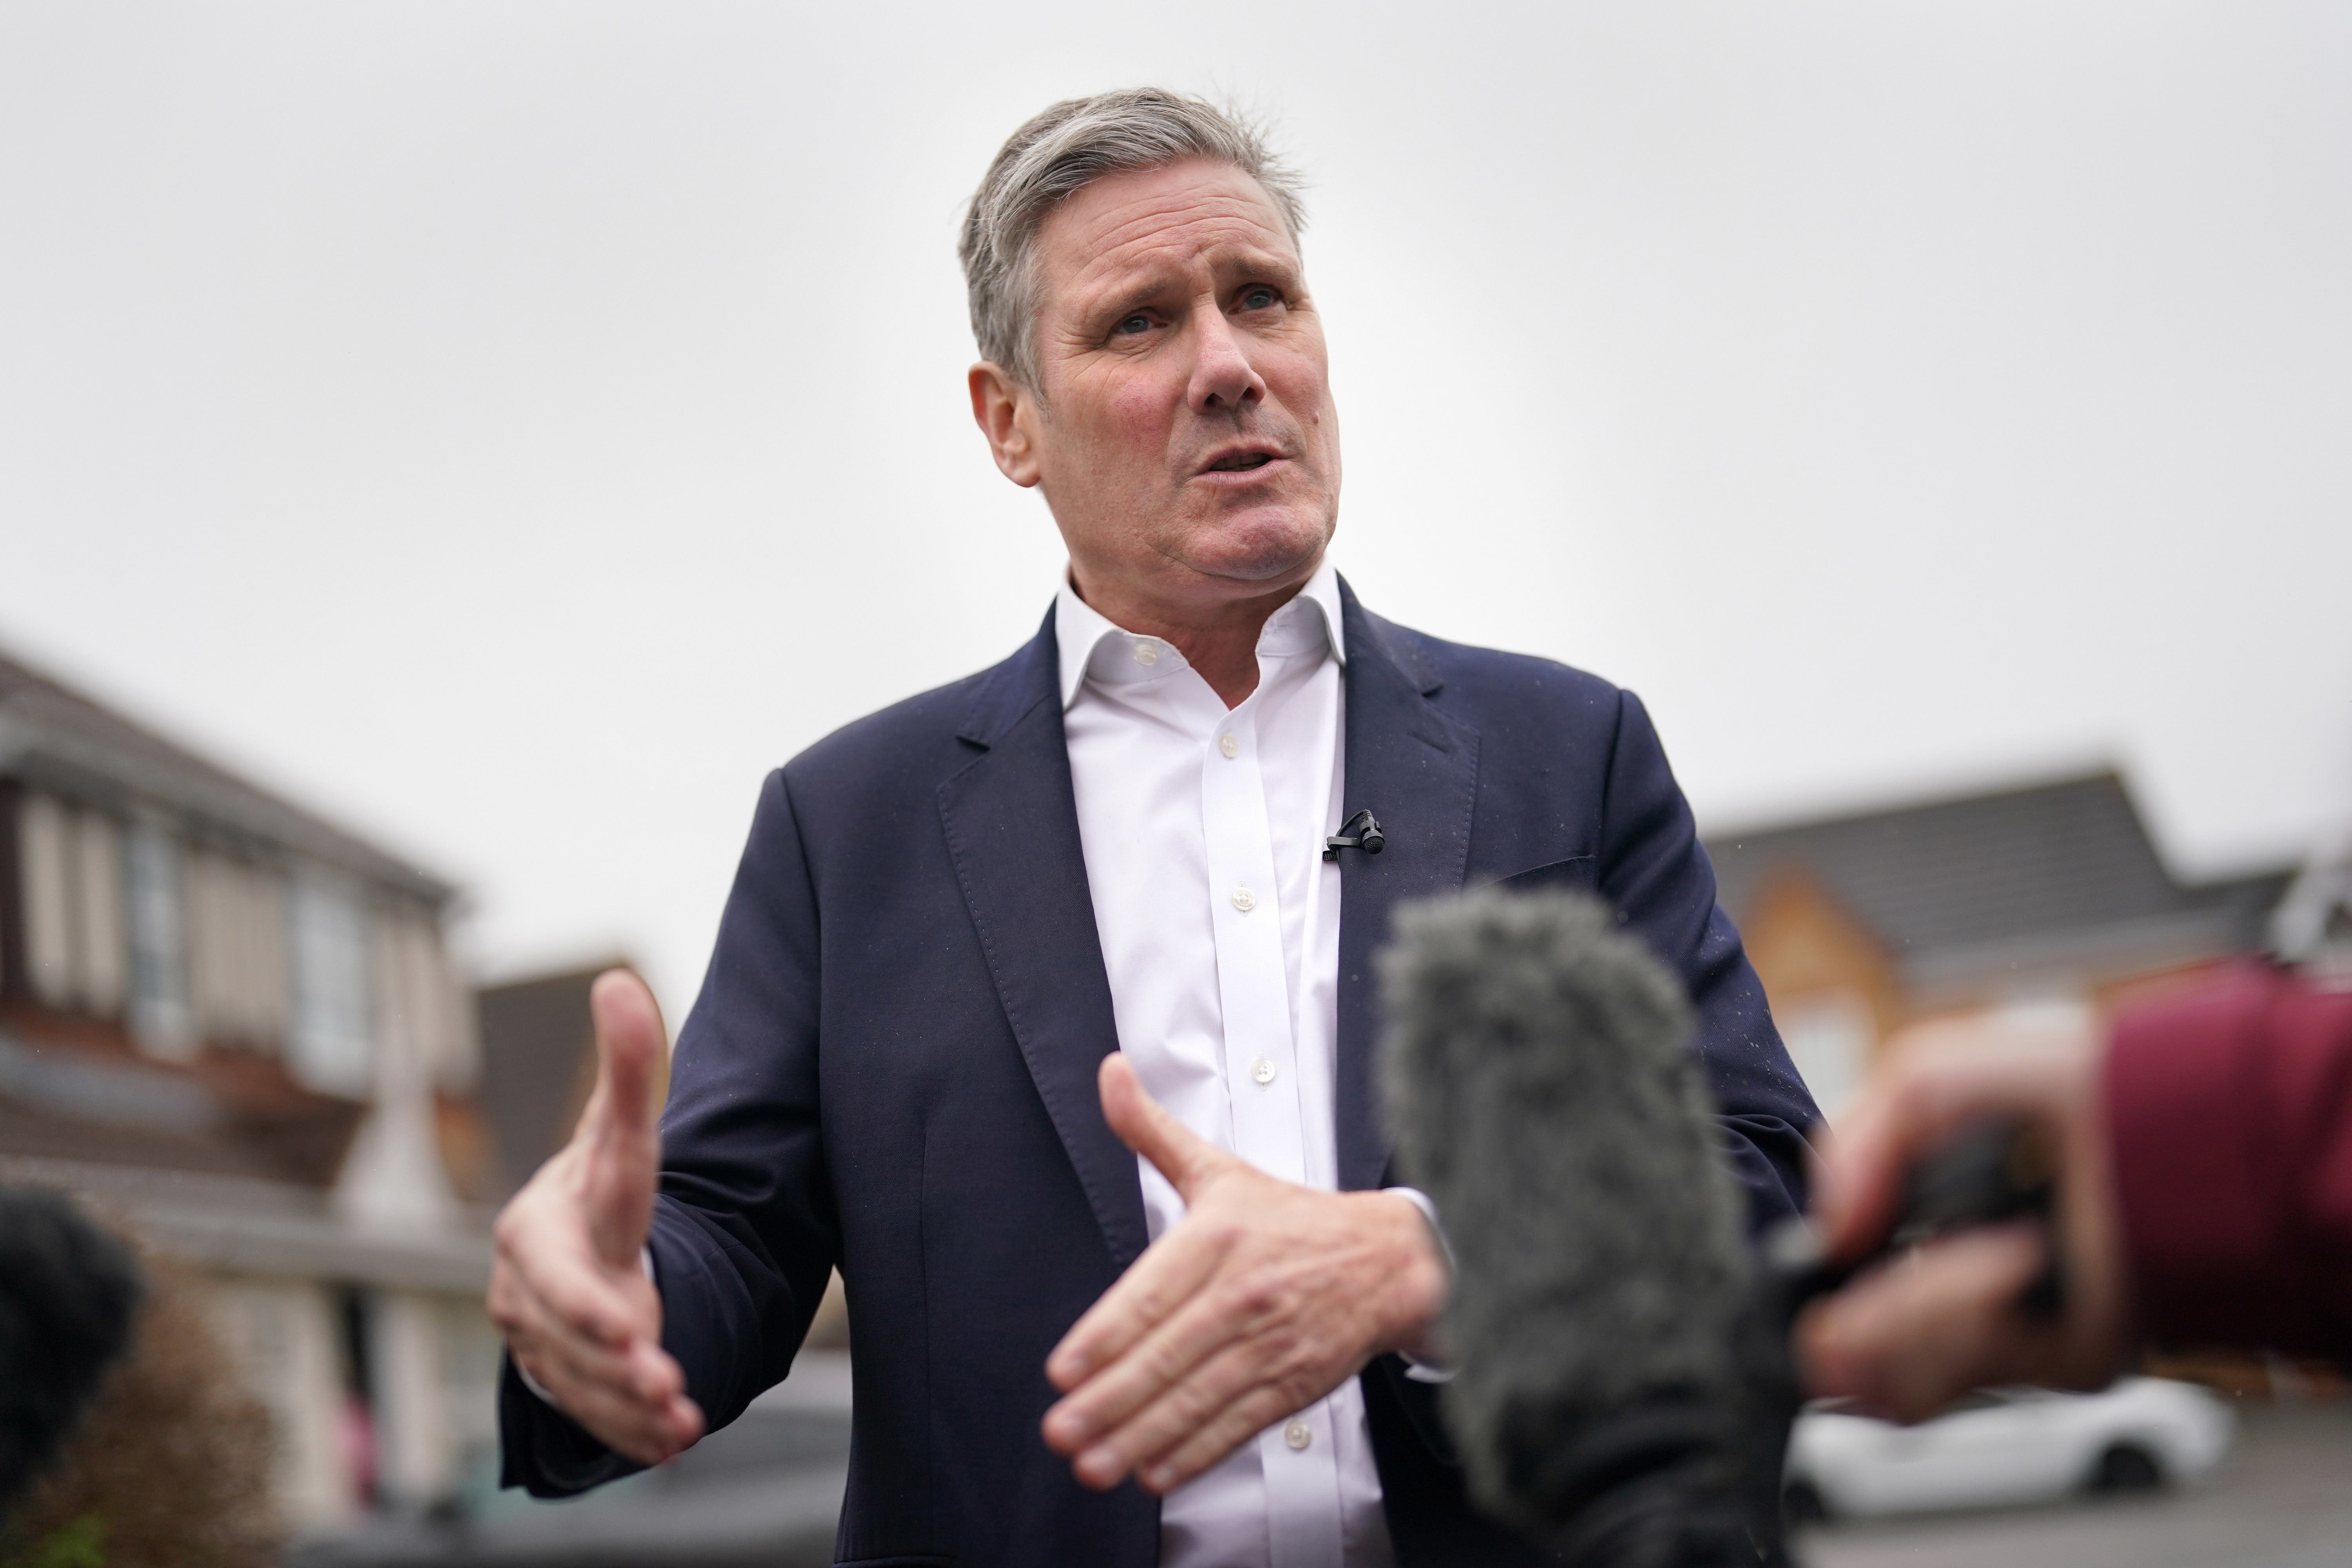 Keir Starmer believes that the Labour party is politically vulnerable on public spending